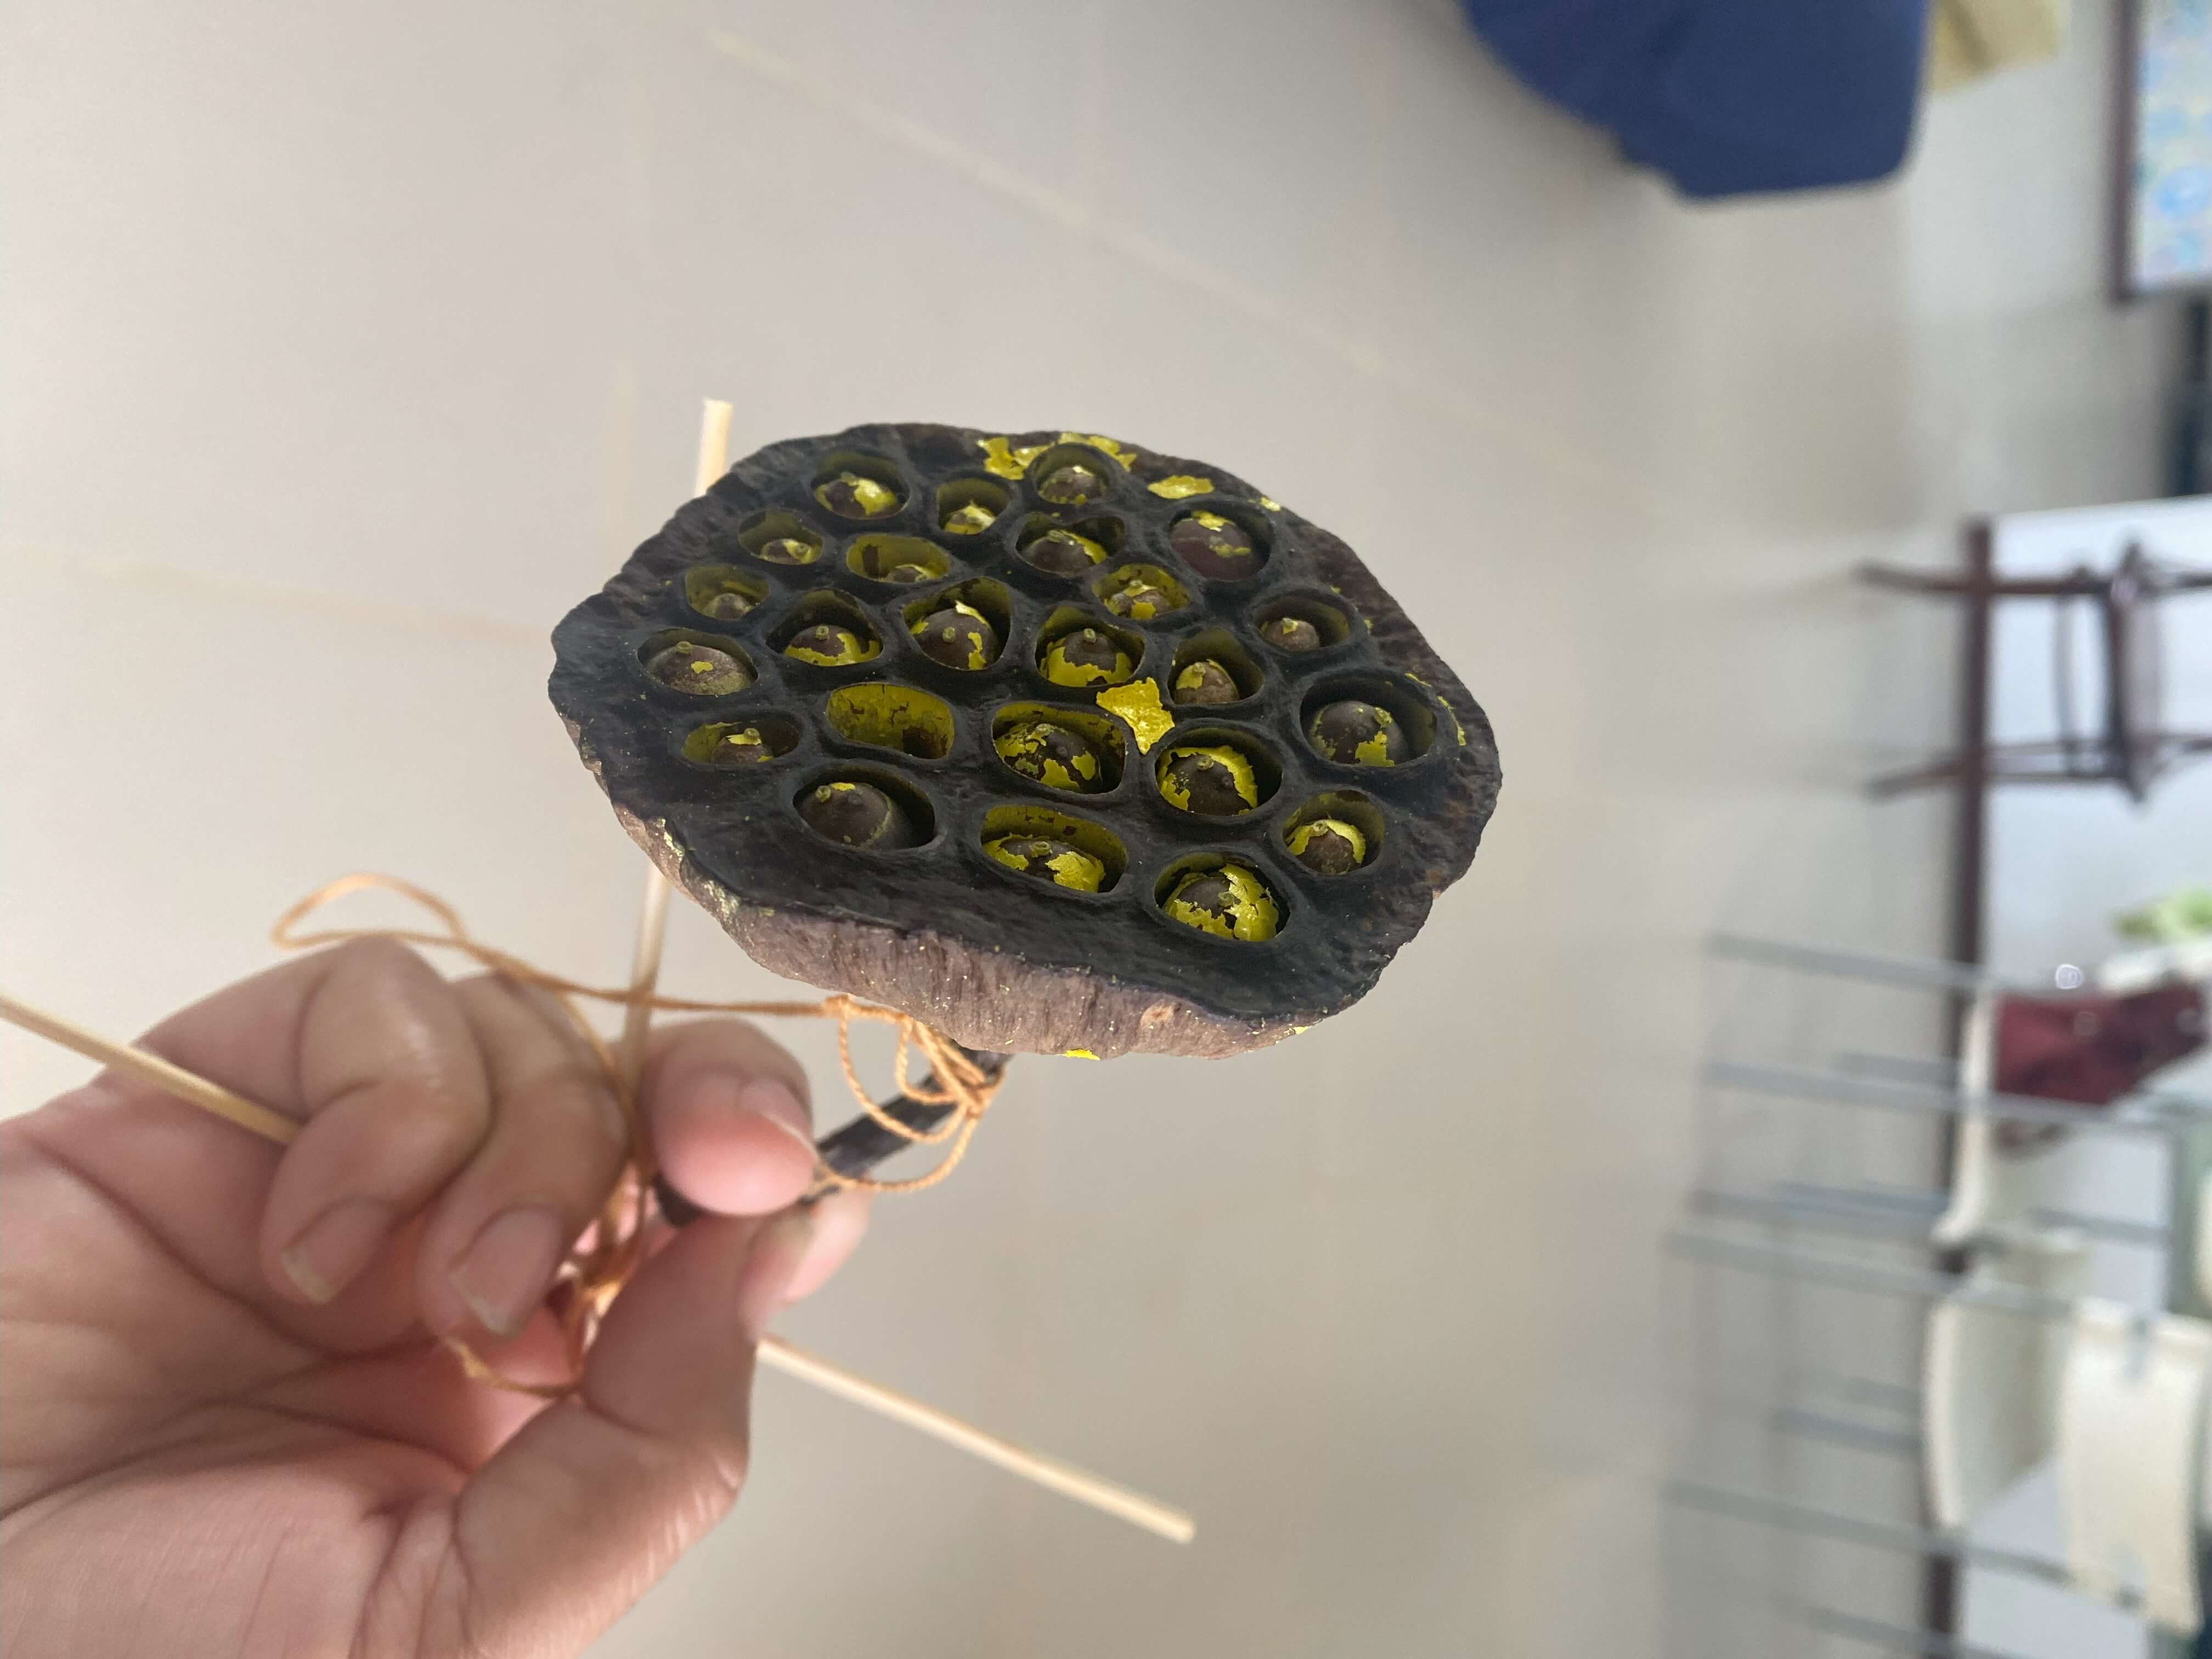 Waterlily seed pod